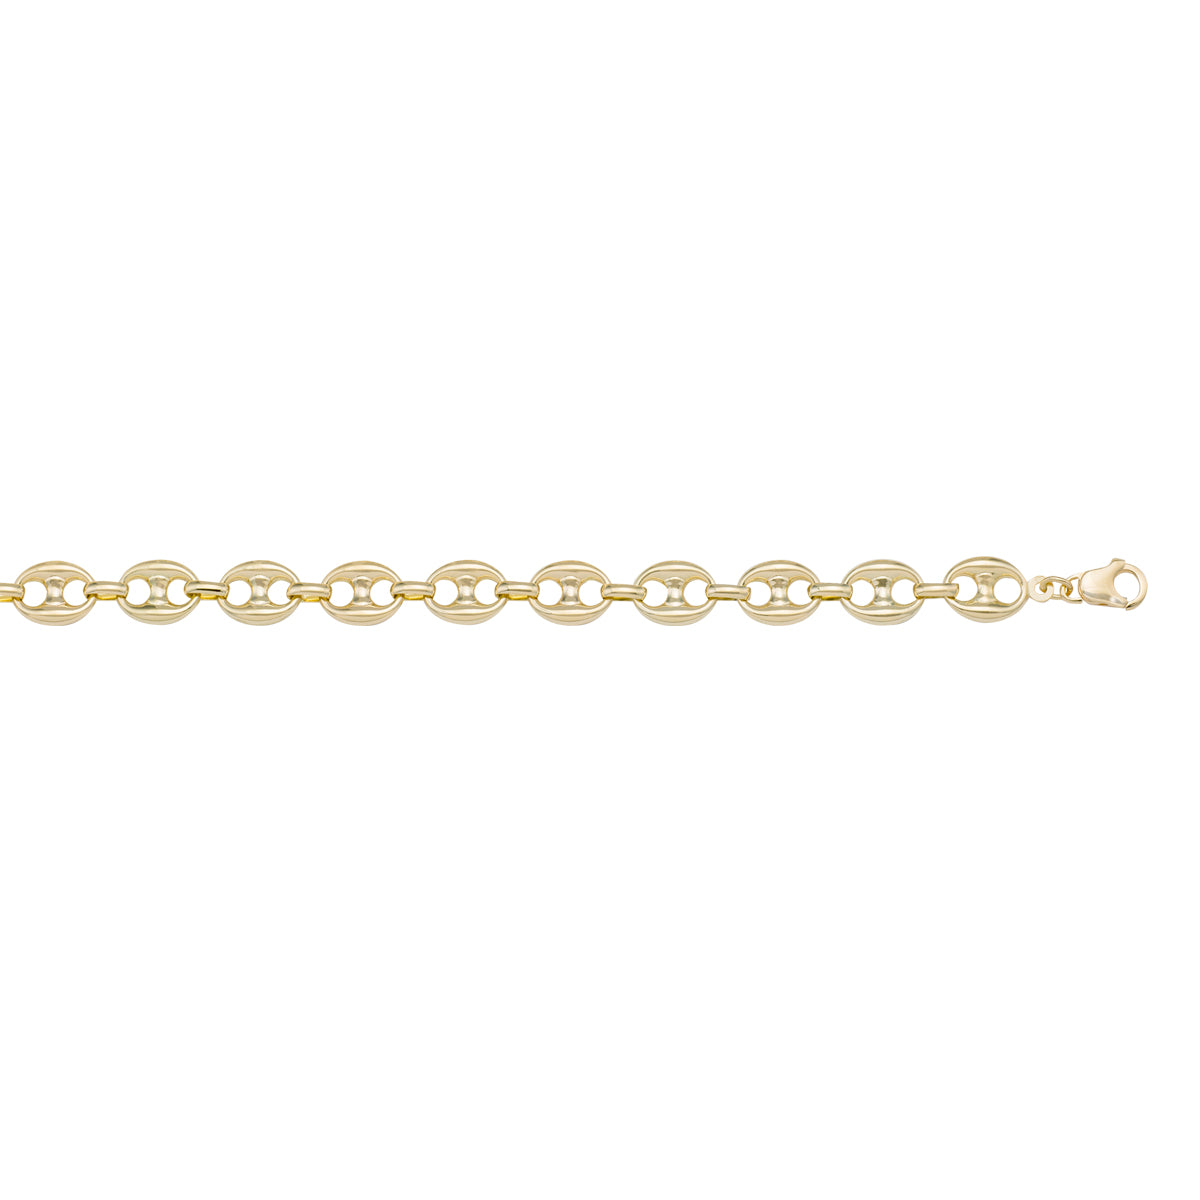 BRACELETS YELLOW GOLD HOLLOW PUFFED ANCHOR CHAIN